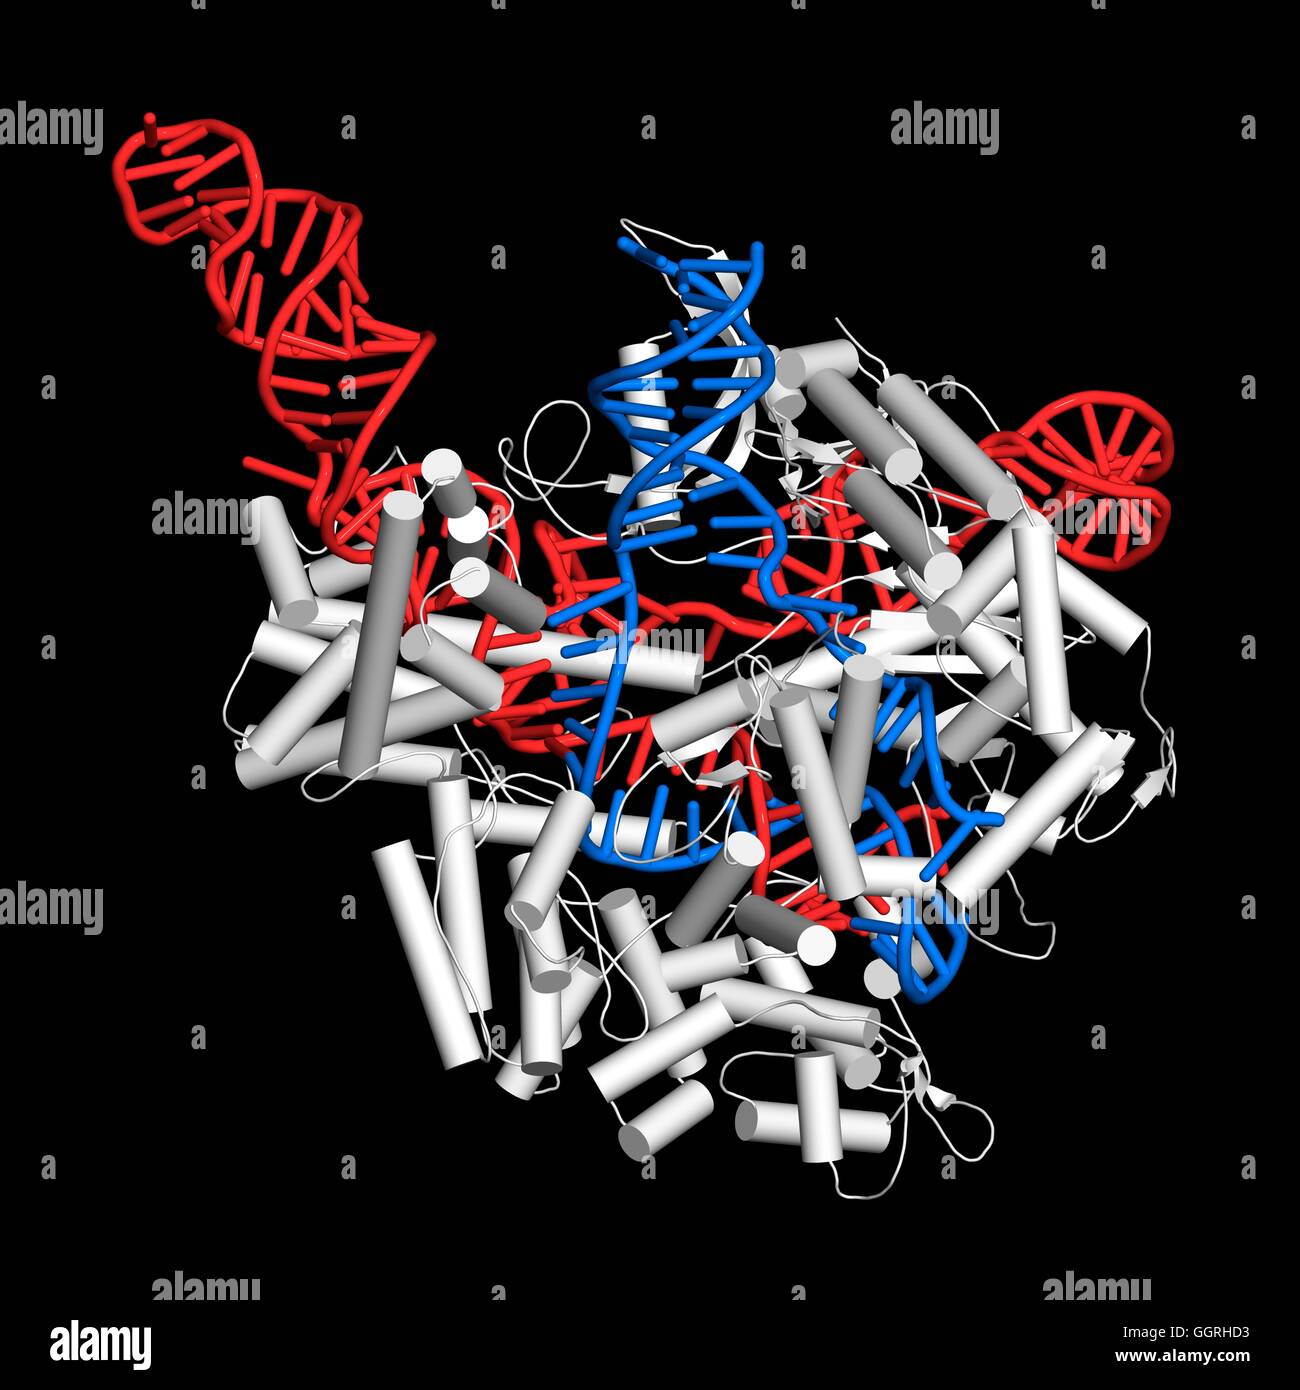 CRISPR-CAS9 gene editing complex from Streptococcus pyogenes. The Cas9 nuclease protein uses a guide RNA sequence to cut DNA at a complementary site. Used in genome engineering and gene therapy. Cas9 protein: cartoon model, white. DNA: ladder model, blue. Stock Photo